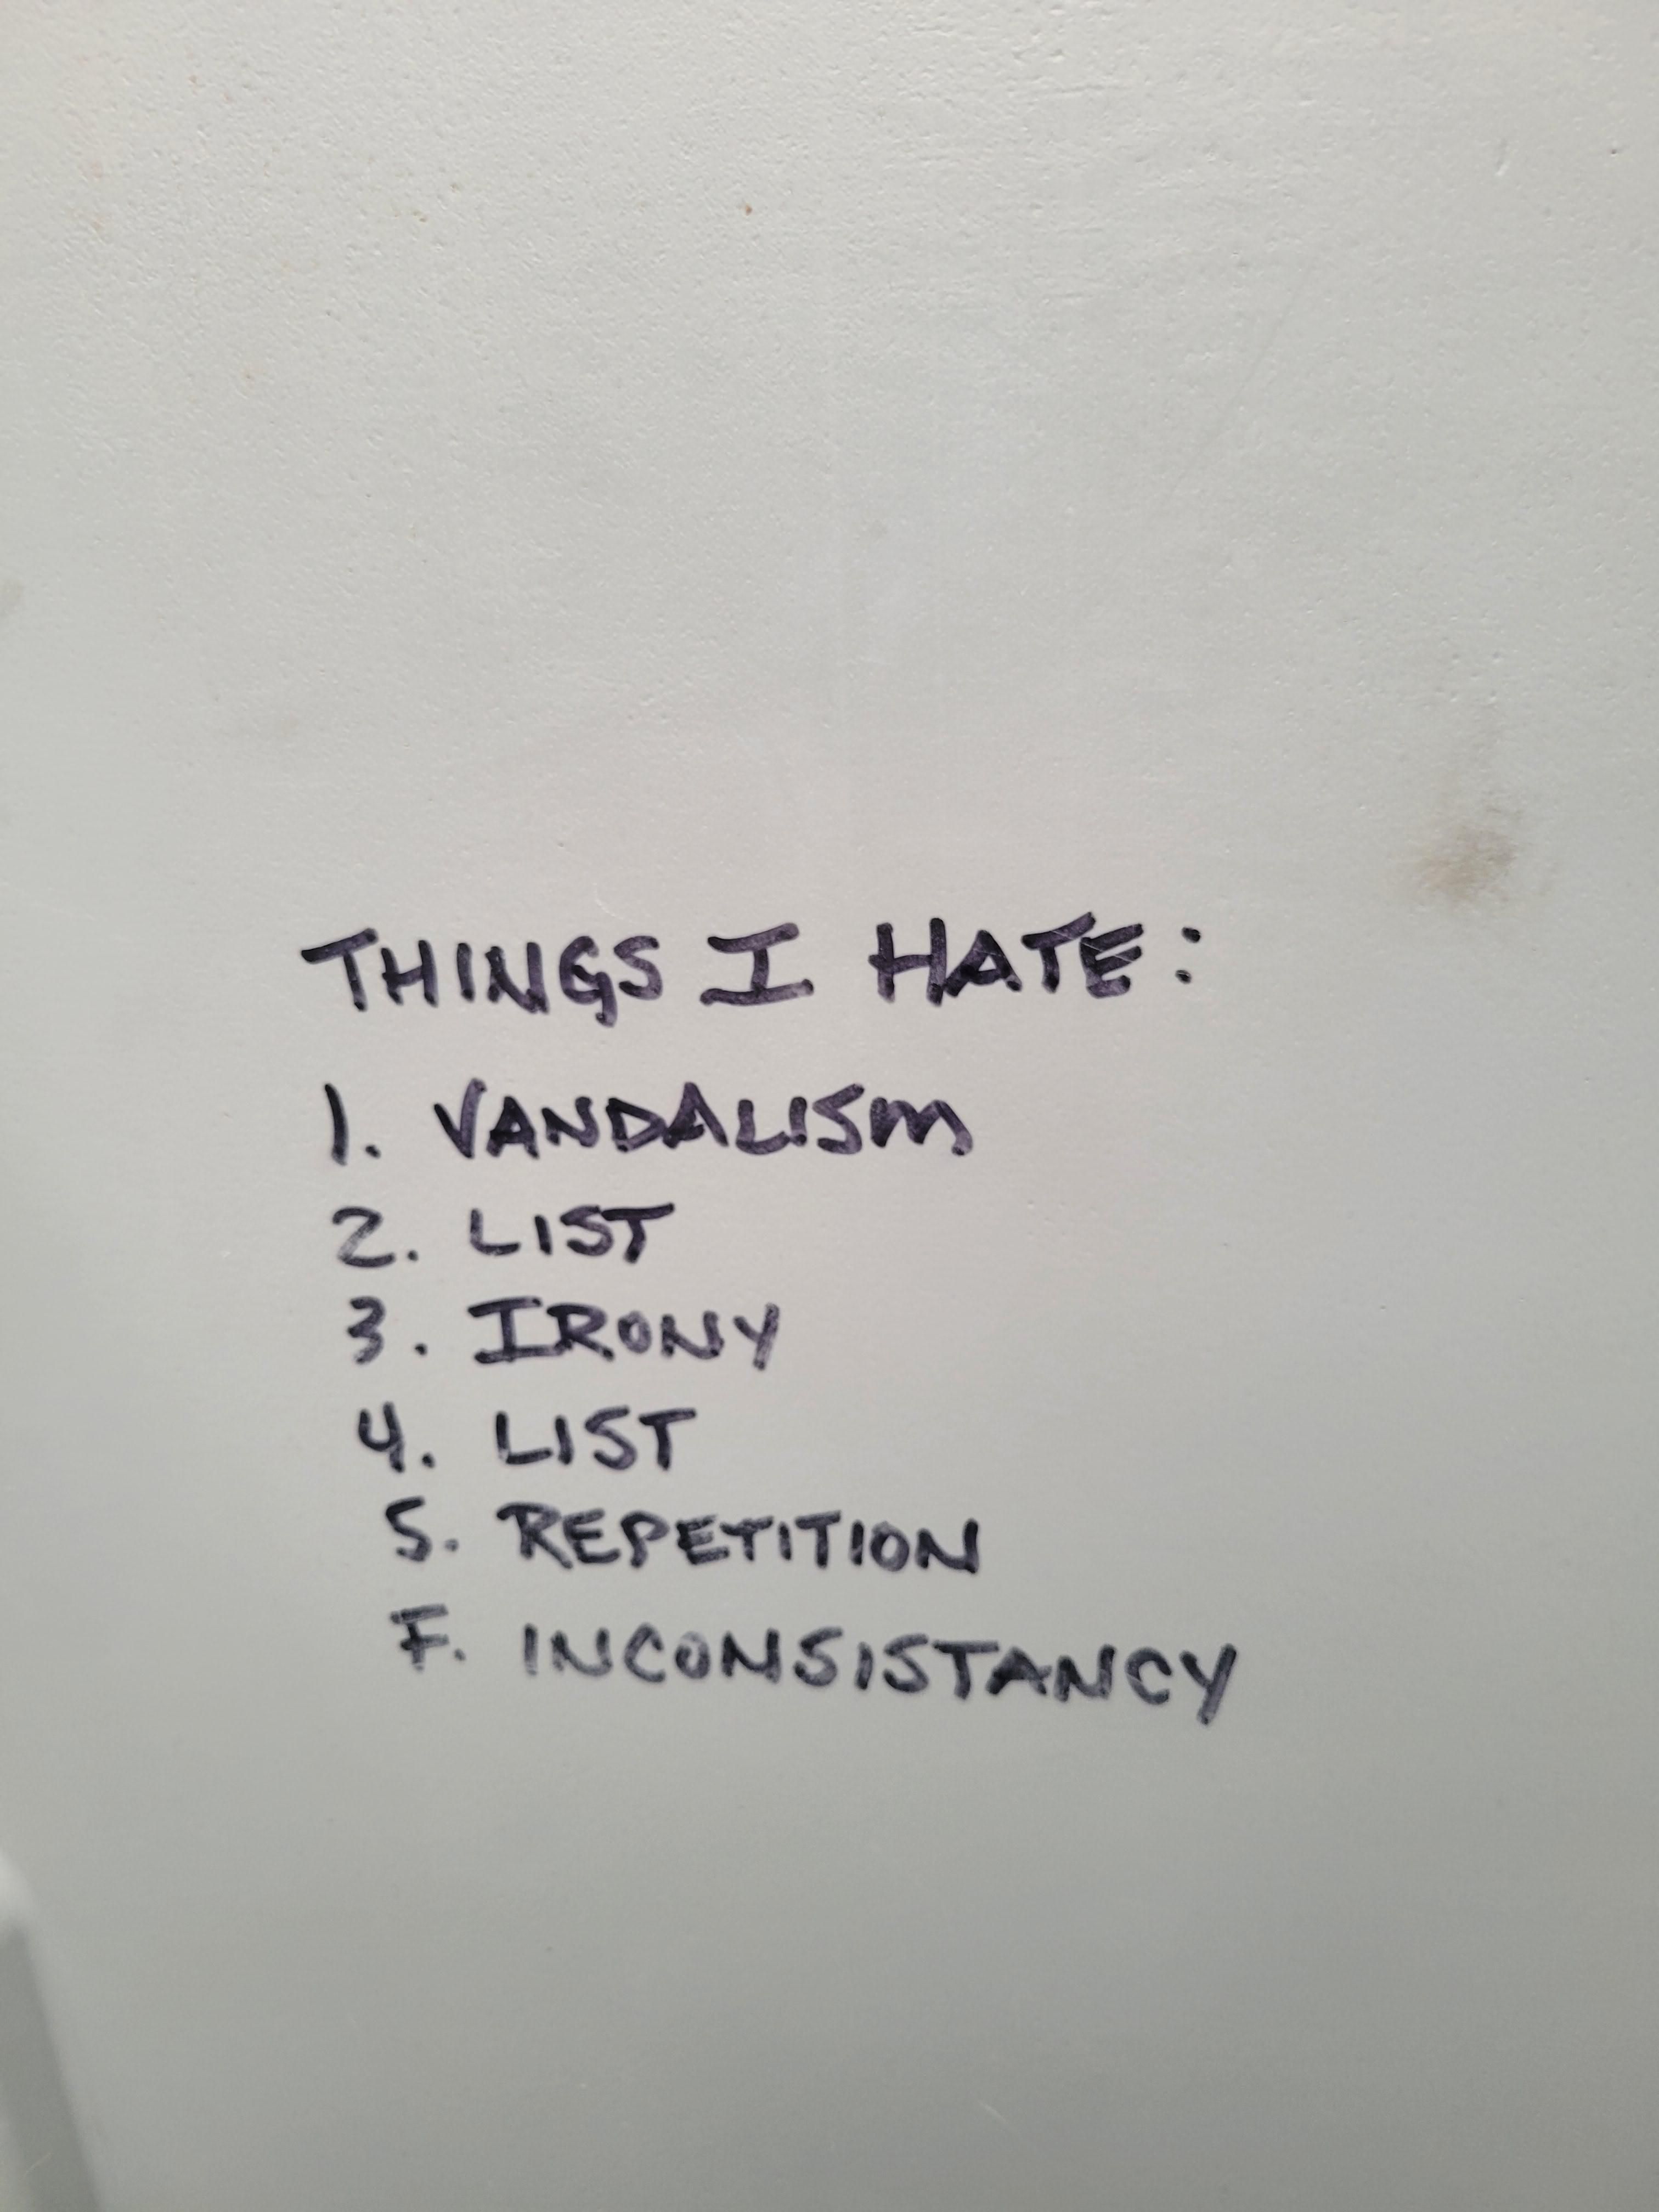 A list found in a port-a-potty at a music festival